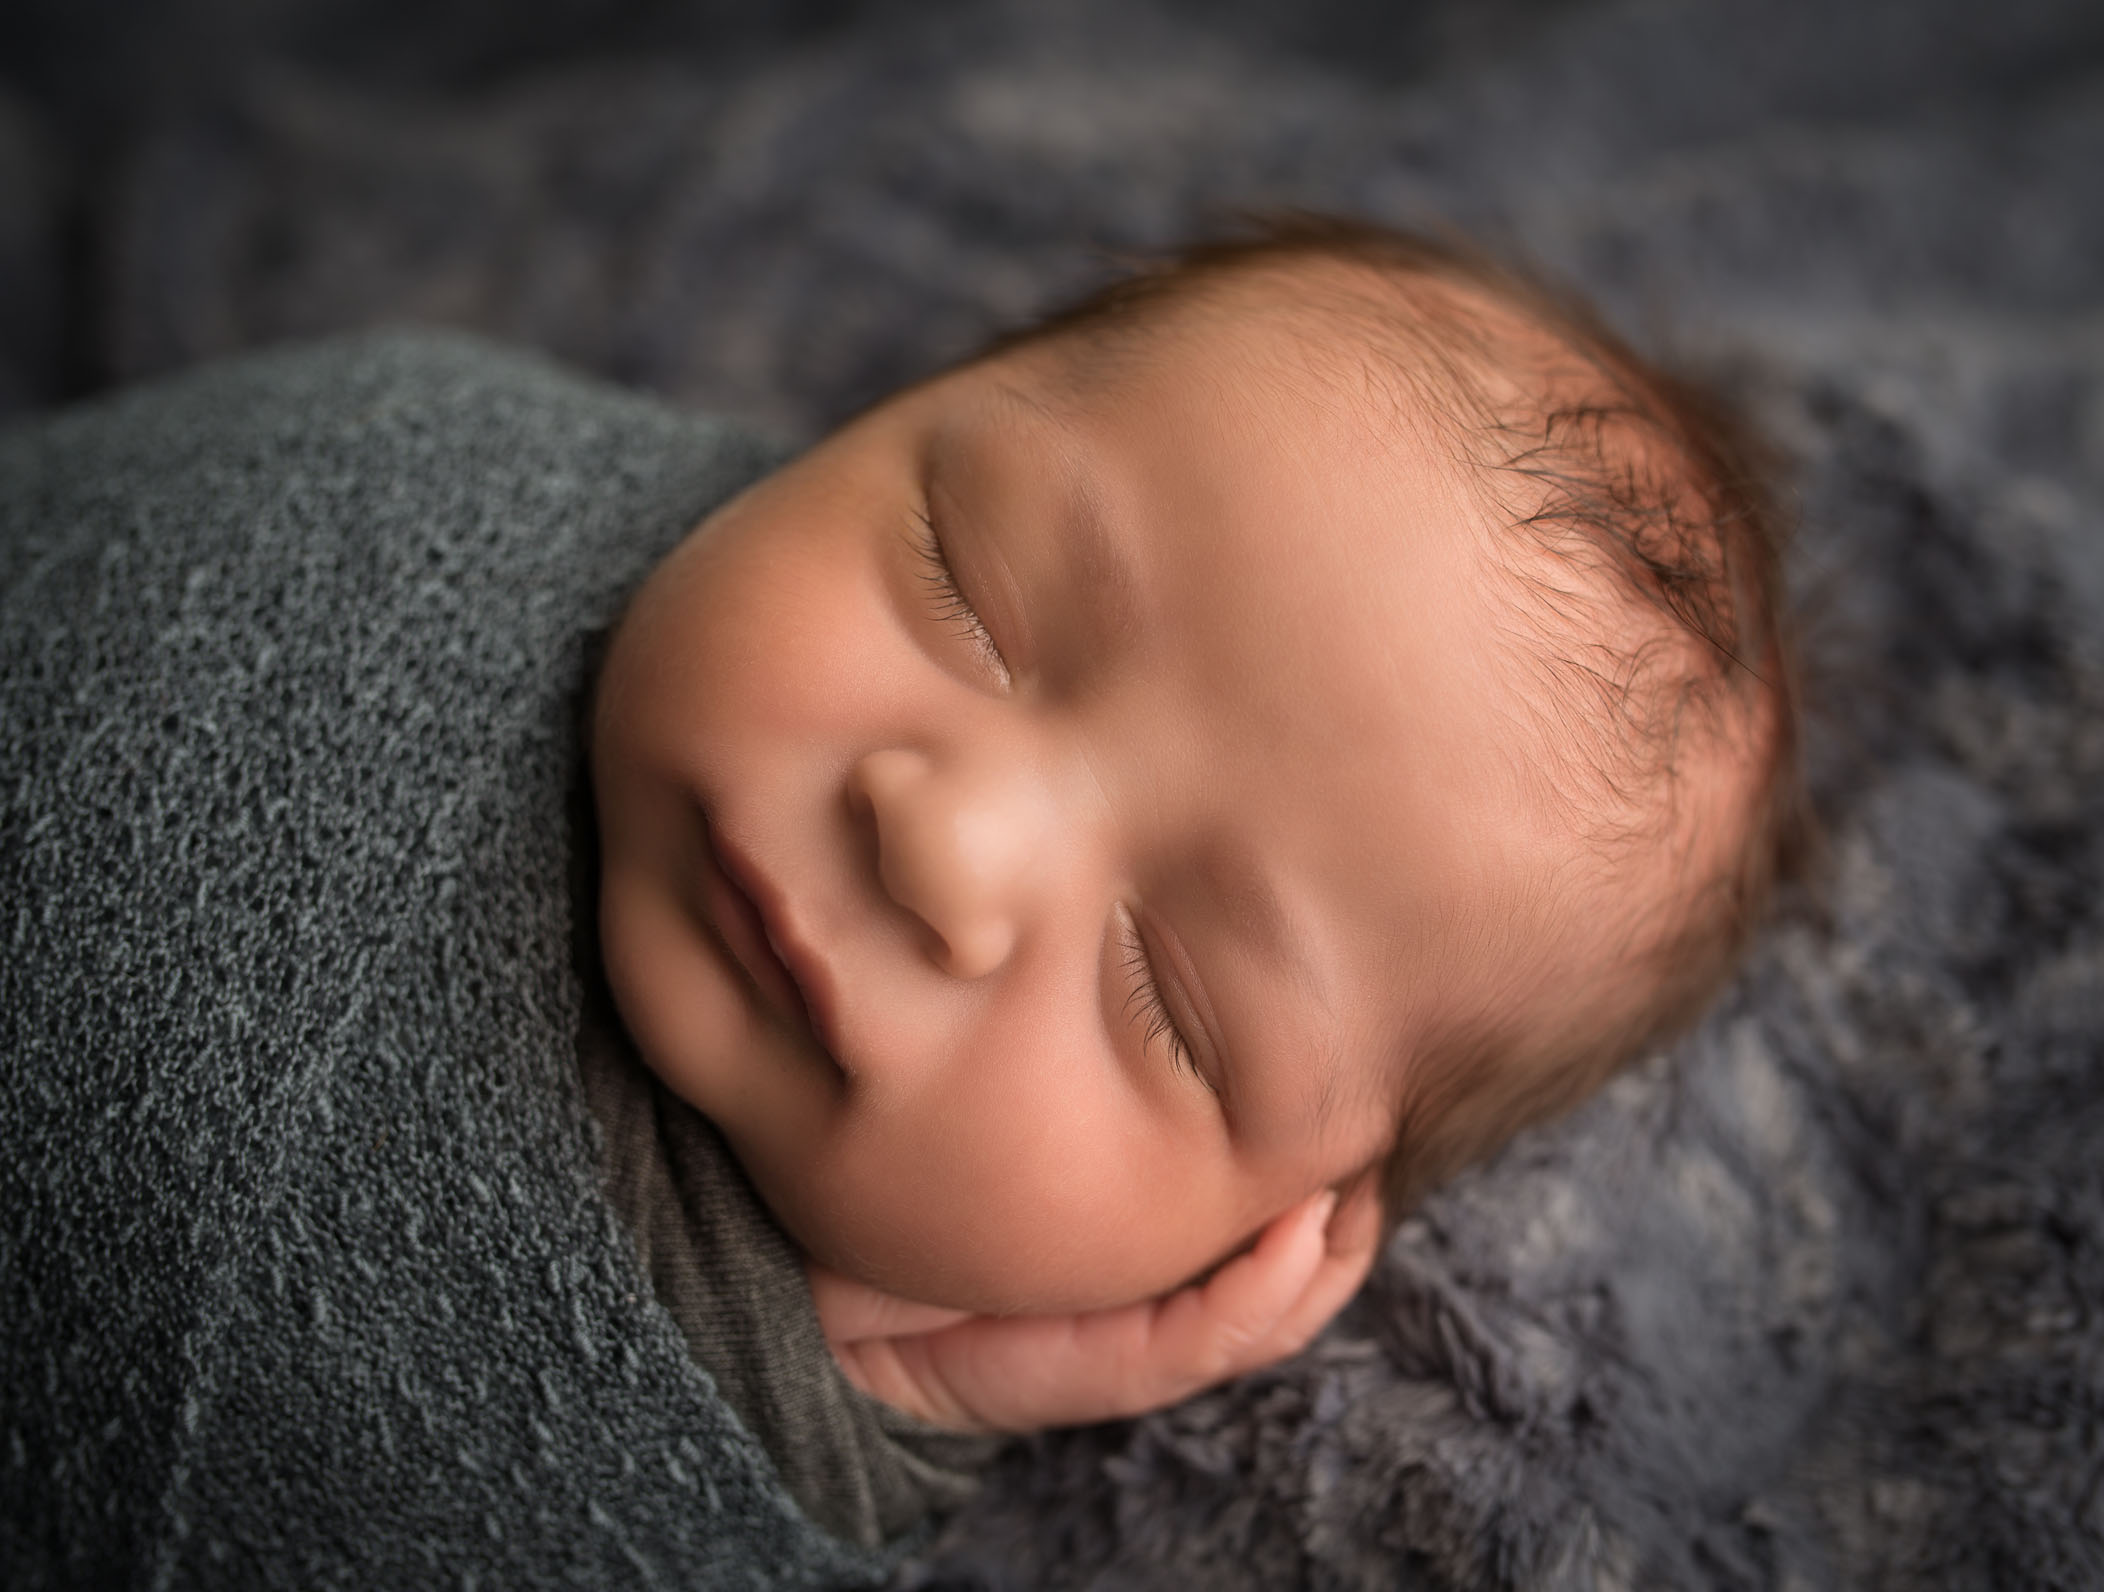 close up photo of newborn baby with long eyelashes and hands in prayer pose